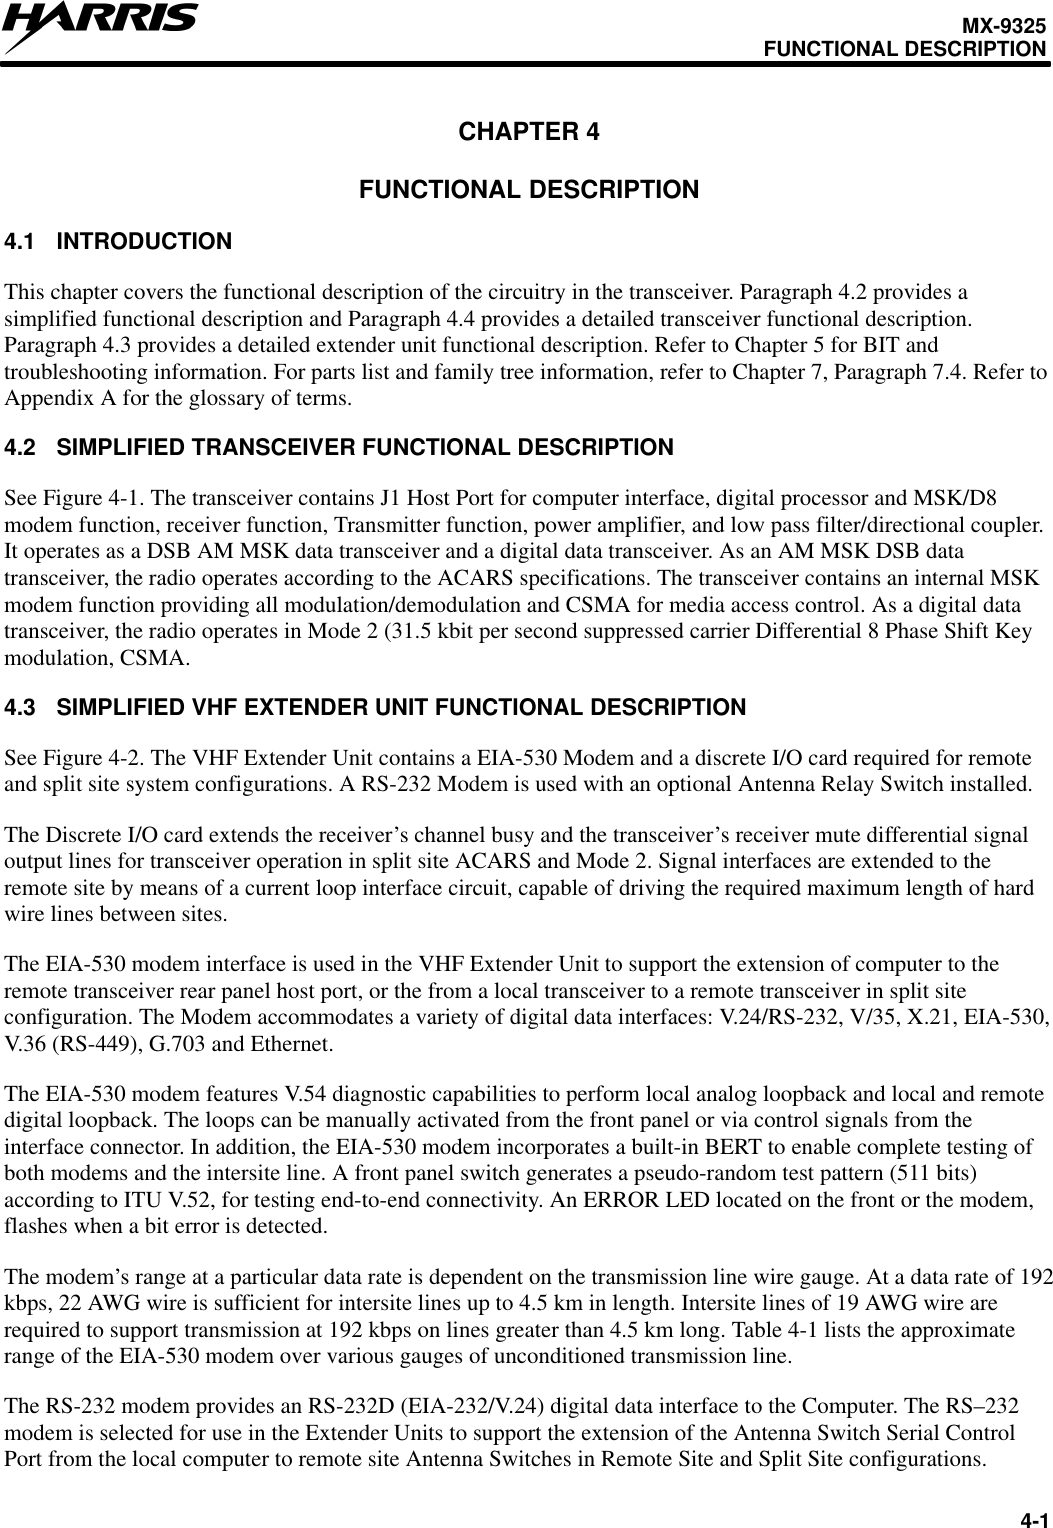 MX-9325FUNCTIONAL DESCRIPTION4-1CHAPTER 4FUNCTIONAL DESCRIPTION4.1 INTRODUCTIONThis chapter covers the functional description of the circuitry in the transceiver. Paragraph 4.2 provides asimplified functional description and Paragraph 4.4 provides a detailed transceiver functional description.Paragraph 4.3 provides a detailed extender unit functional description. Refer to Chapter 5 for BIT andtroubleshooting information. For parts list and family tree information, refer to Chapter 7, Paragraph 7.4. Refer toAppendix A for the glossary of terms.4.2 SIMPLIFIED TRANSCEIVER FUNCTIONAL DESCRIPTIONSee Figure 4-1. The transceiver contains J1 Host Port for computer interface, digital processor and MSK/D8modem function, receiver function, Transmitter function, power amplifier, and low pass filter/directional coupler.It operates as a DSB AM MSK data transceiver and a digital data transceiver. As an AM MSK DSB datatransceiver, the radio operates according to the ACARS specifications. The transceiver contains an internal MSKmodem function providing all modulation/demodulation and CSMA for media access control. As a digital datatransceiver, the radio operates in Mode 2 (31.5 kbit per second suppressed carrier Differential 8 Phase Shift Keymodulation, CSMA.4.3 SIMPLIFIED VHF EXTENDER UNIT FUNCTIONAL DESCRIPTIONSee Figure 4-2. The VHF Extender Unit contains a EIA-530 Modem and a discrete I/O card required for remoteand split site system configurations. A RS-232 Modem is used with an optional Antenna Relay Switch installed.The Discrete I/O card extends the receiver’s channel busy and the transceiver’s receiver mute differential signaloutput lines for transceiver operation in split site ACARS and Mode 2. Signal interfaces are extended to theremote site by means of a current loop interface circuit, capable of driving the required maximum length of hardwire lines between sites.The EIA-530 modem interface is used in the VHF Extender Unit to support the extension of computer to theremote transceiver rear panel host port, or the from a local transceiver to a remote transceiver in split siteconfiguration. The Modem accommodates a variety of digital data interfaces: V.24/RS-232, V/35, X.21, EIA-530,V.36 (RS-449), G.703 and Ethernet.The EIA-530 modem features V.54 diagnostic capabilities to perform local analog loopback and local and remotedigital loopback. The loops can be manually activated from the front panel or via control signals from theinterface connector. In addition, the EIA-530 modem incorporates a built-in BERT to enable complete testing ofboth modems and the intersite line. A front panel switch generates a pseudo-random test pattern (511 bits)according to ITU V.52, for testing end-to-end connectivity. An ERROR LED located on the front or the modem,flashes when a bit error is detected.The modem’s range at a particular data rate is dependent on the transmission line wire gauge. At a data rate of 192kbps, 22 AWG wire is sufficient for intersite lines up to 4.5 km in length. Intersite lines of 19 AWG wire arerequired to support transmission at 192 kbps on lines greater than 4.5 km long. Table 4-1 lists the approximaterange of the EIA-530 modem over various gauges of unconditioned transmission line.The RS-232 modem provides an RS-232D (EIA-232/V.24) digital data interface to the Computer. The RS–232modem is selected for use in the Extender Units to support the extension of the Antenna Switch Serial ControlPort from the local computer to remote site Antenna Switches in Remote Site and Split Site configurations.